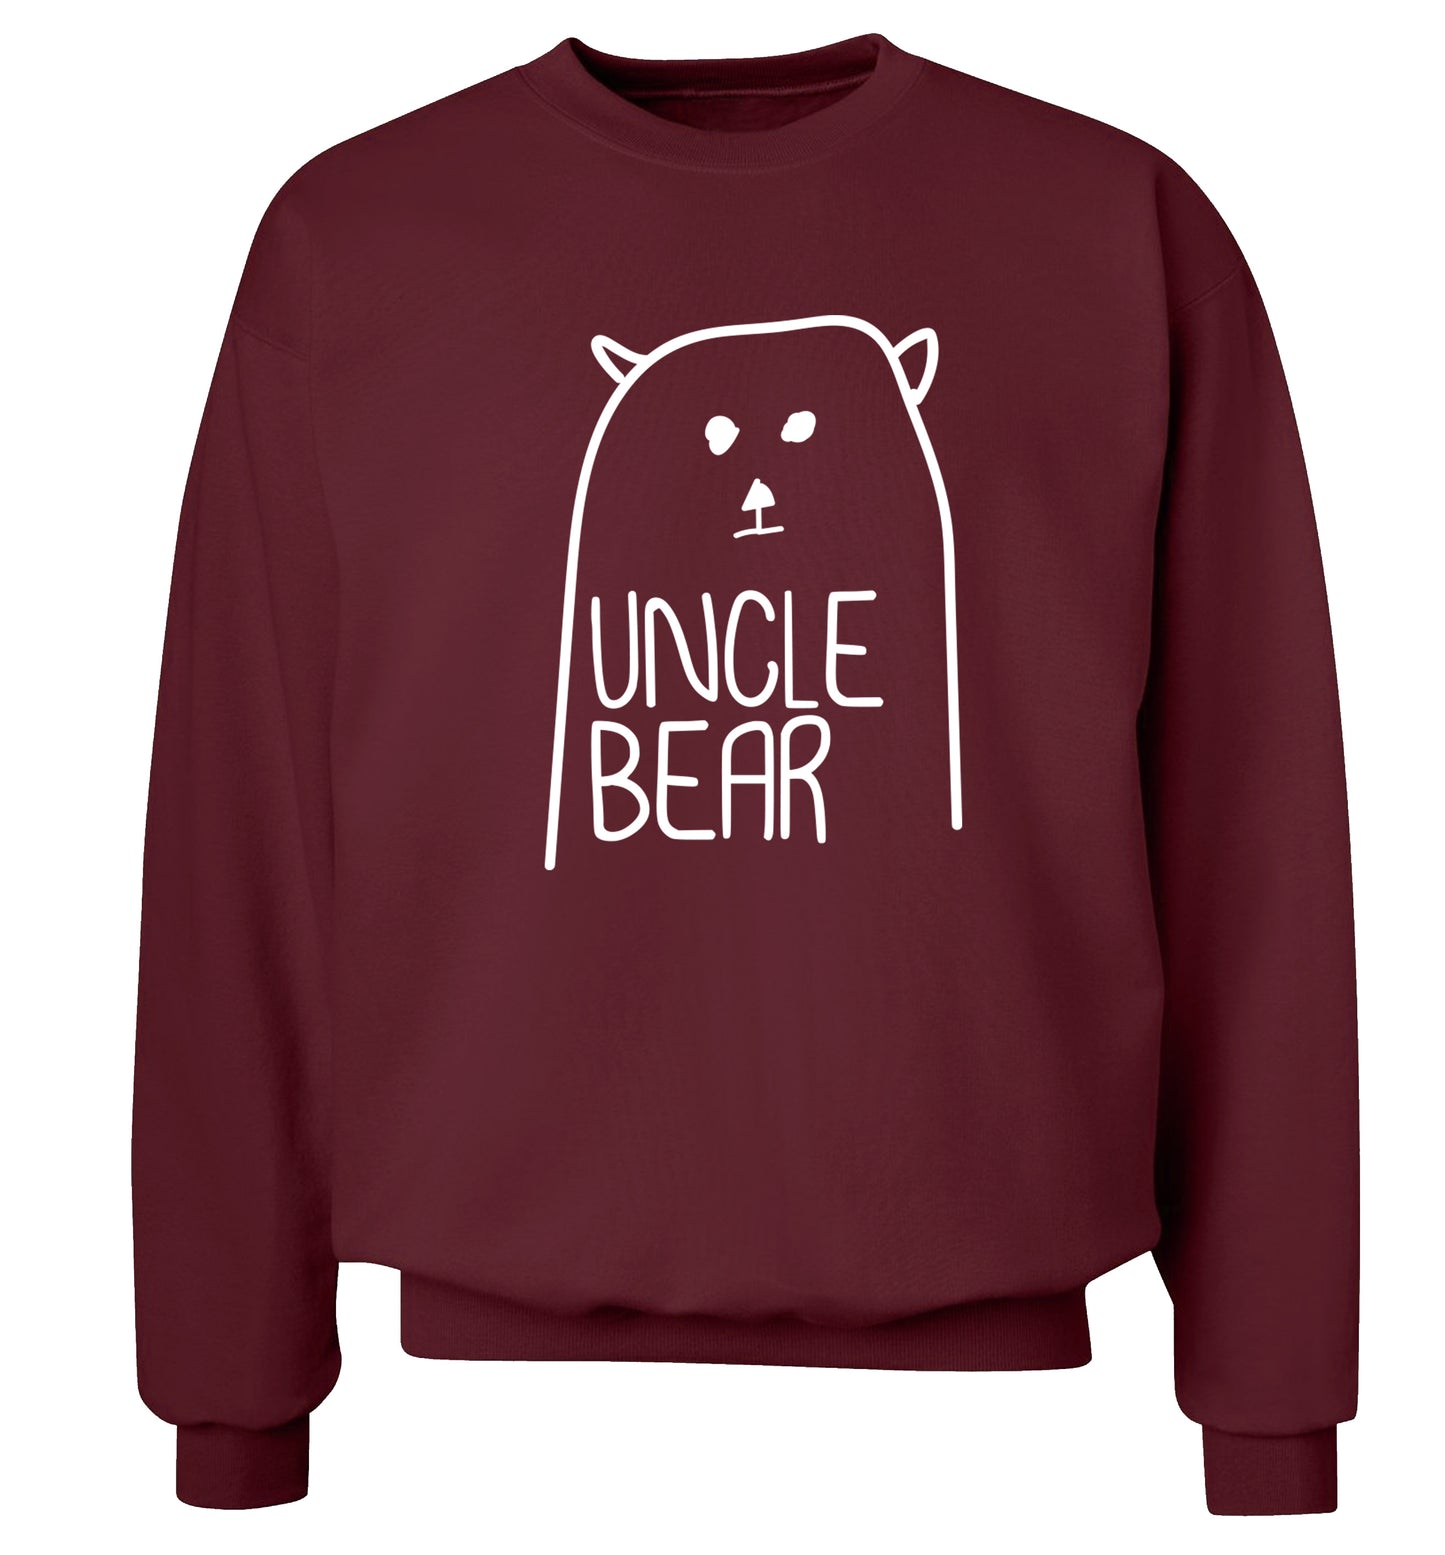 Uncle bear Adult's unisex maroon Sweater 2XL